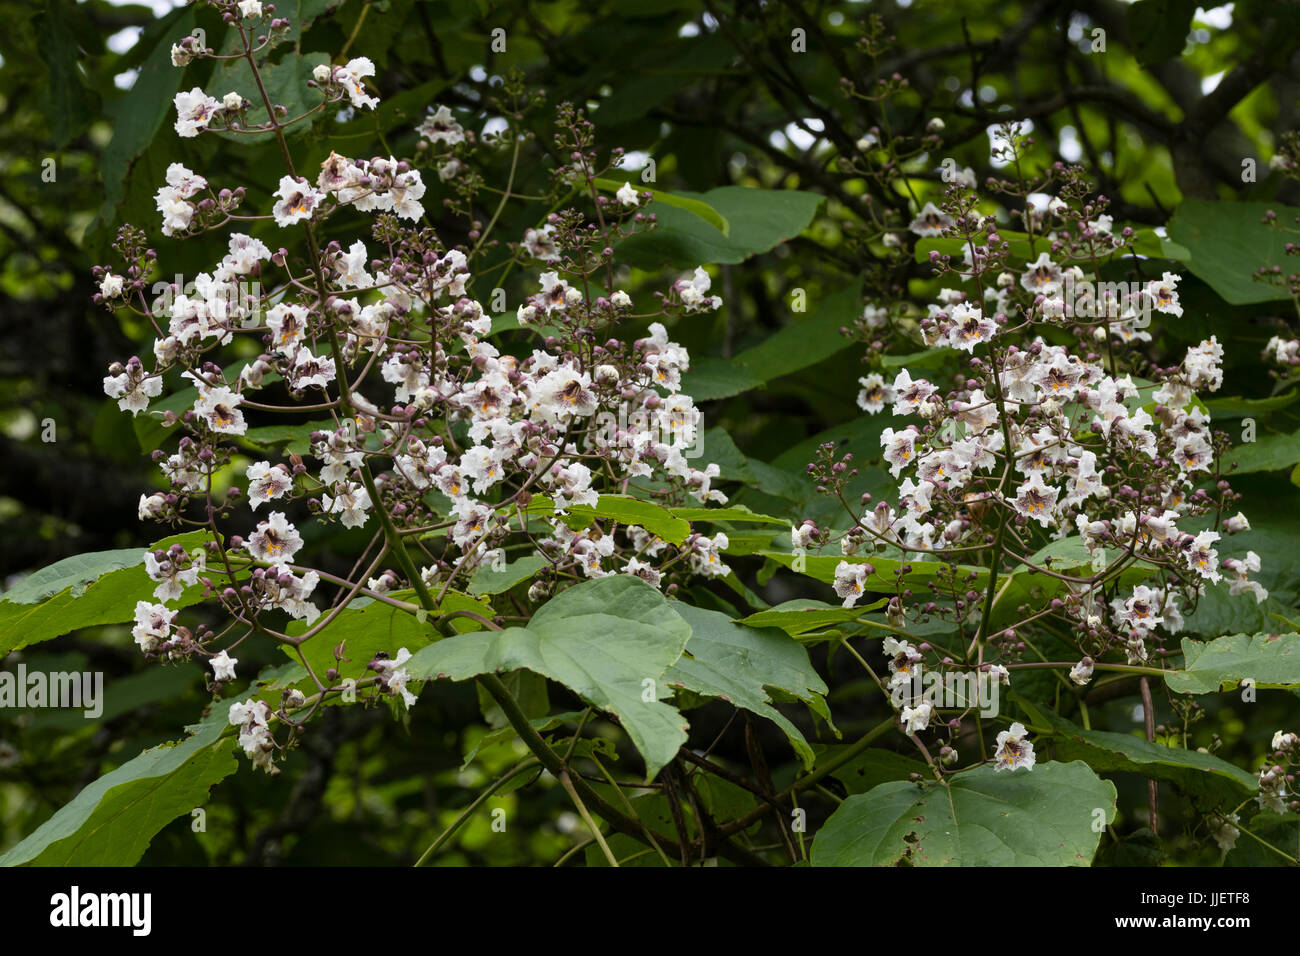 Brown spotted white flowers in the panicle of the ornamental tree, Catalpa x erubescens 'Purpurea' Stock Photo